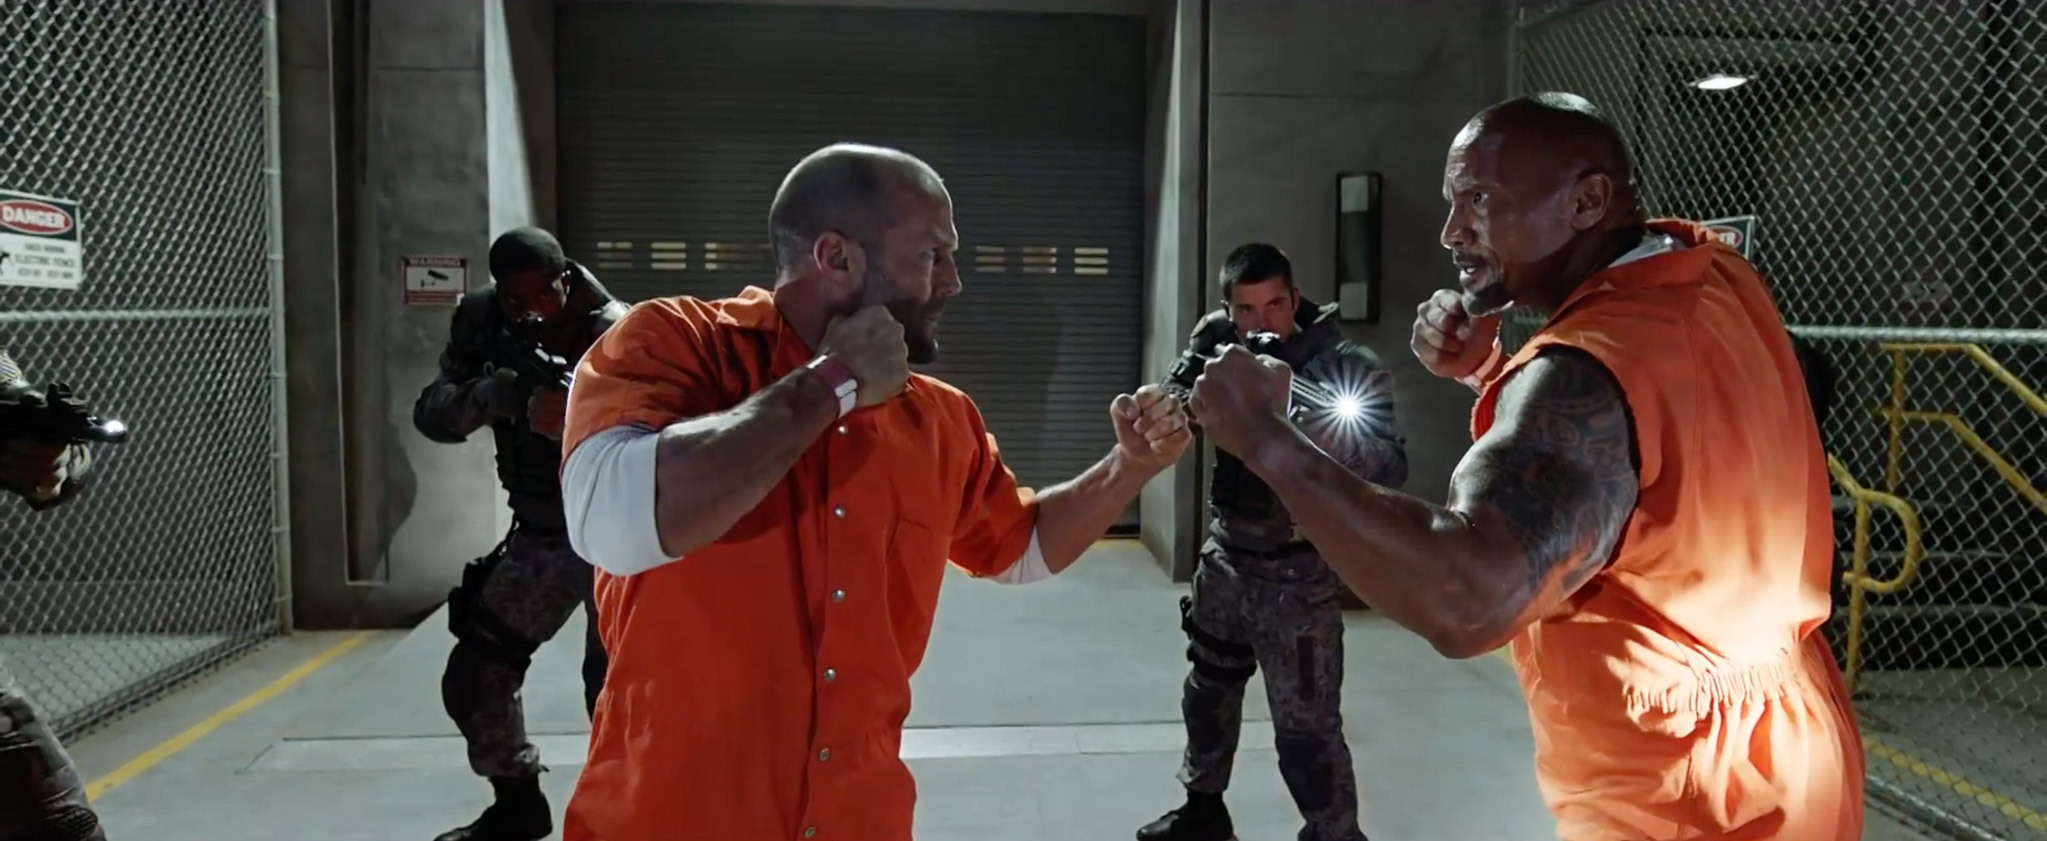 Fate of the Furious movie trivia: Check out X facts about the latest flick in the Fast & the Furious franchise that you really need to know!